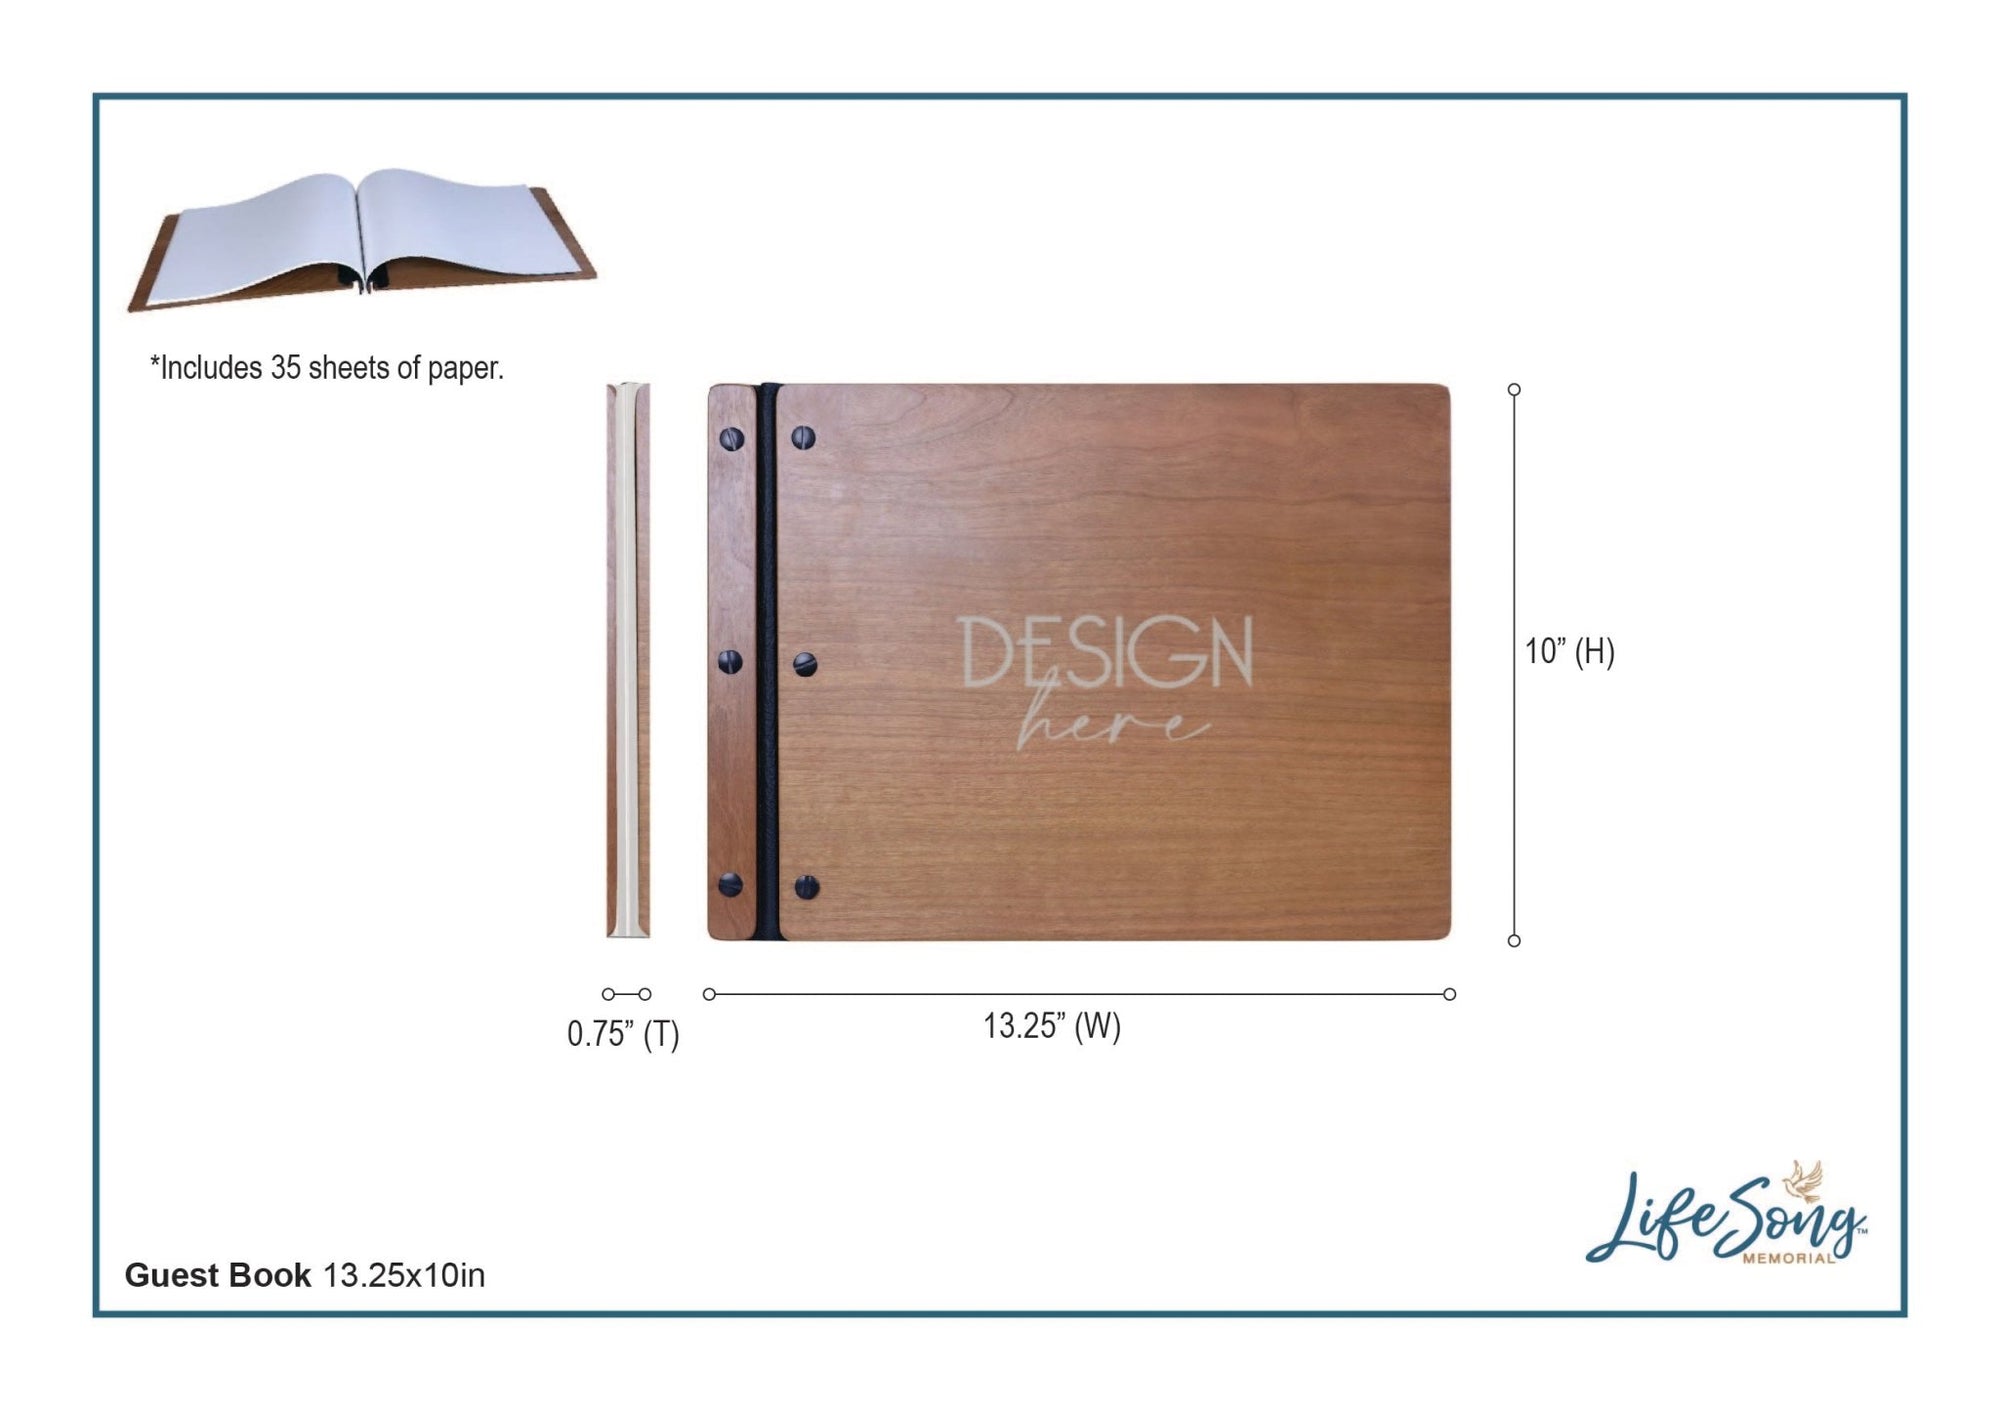 Custom Large Wooden Memorial Guestbook 13.375x10in - We Thought Of (Maple) - LifeSong Milestones